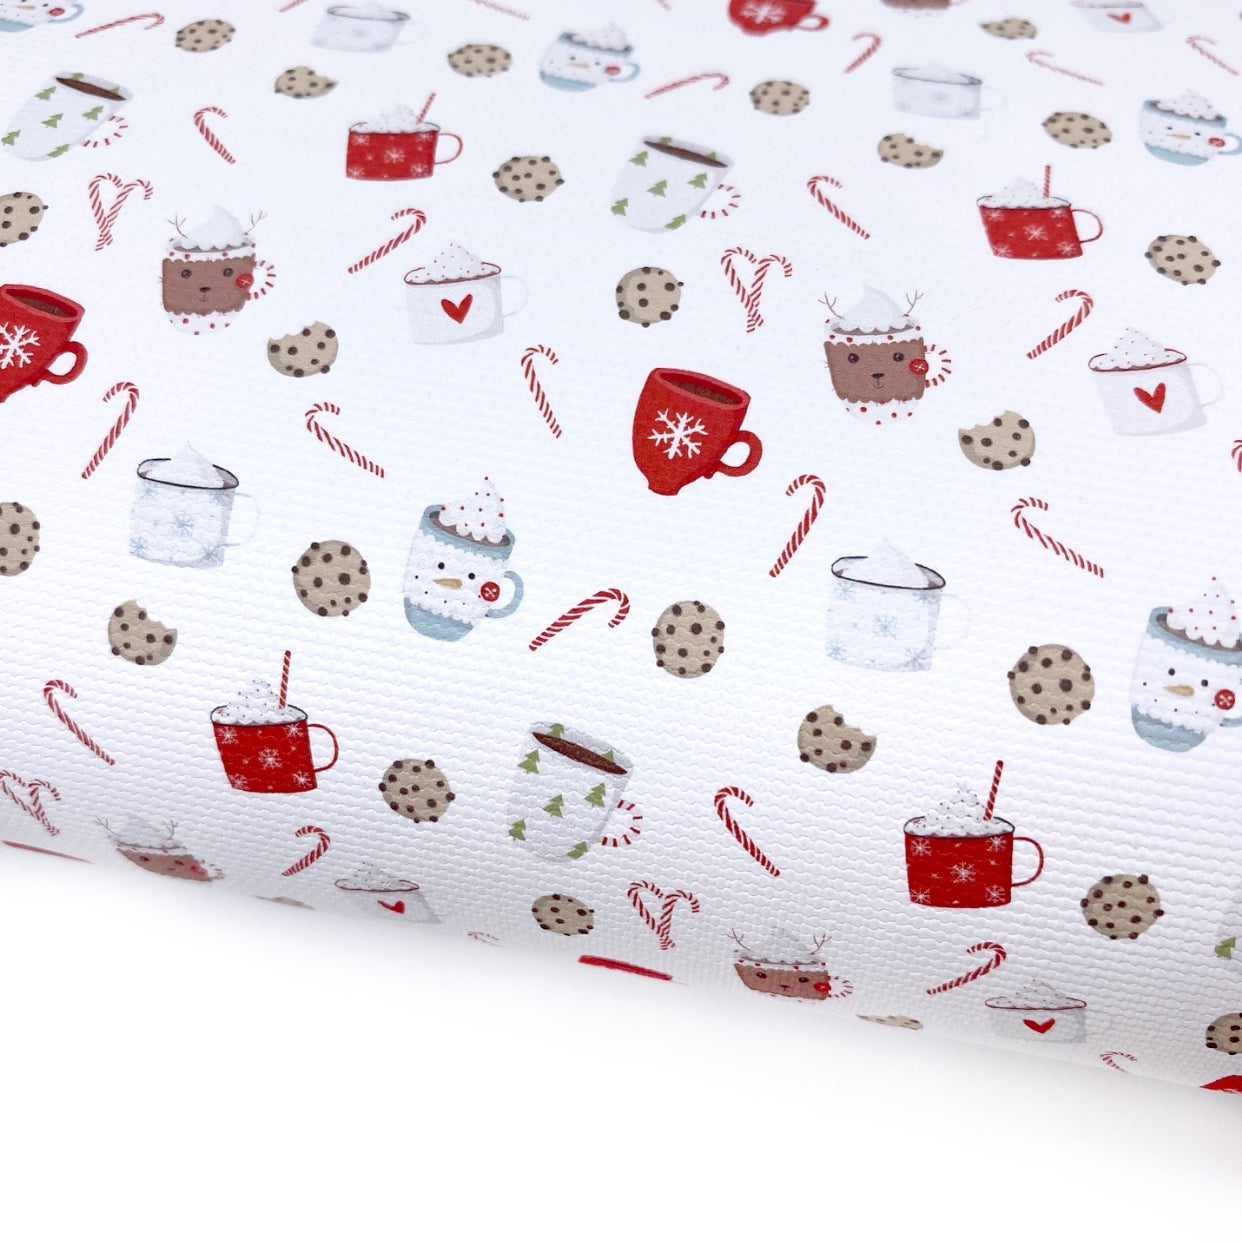 Hot Cocoa, Candy Canes & Cookies Lux Premium Canvas Bow Fabrics